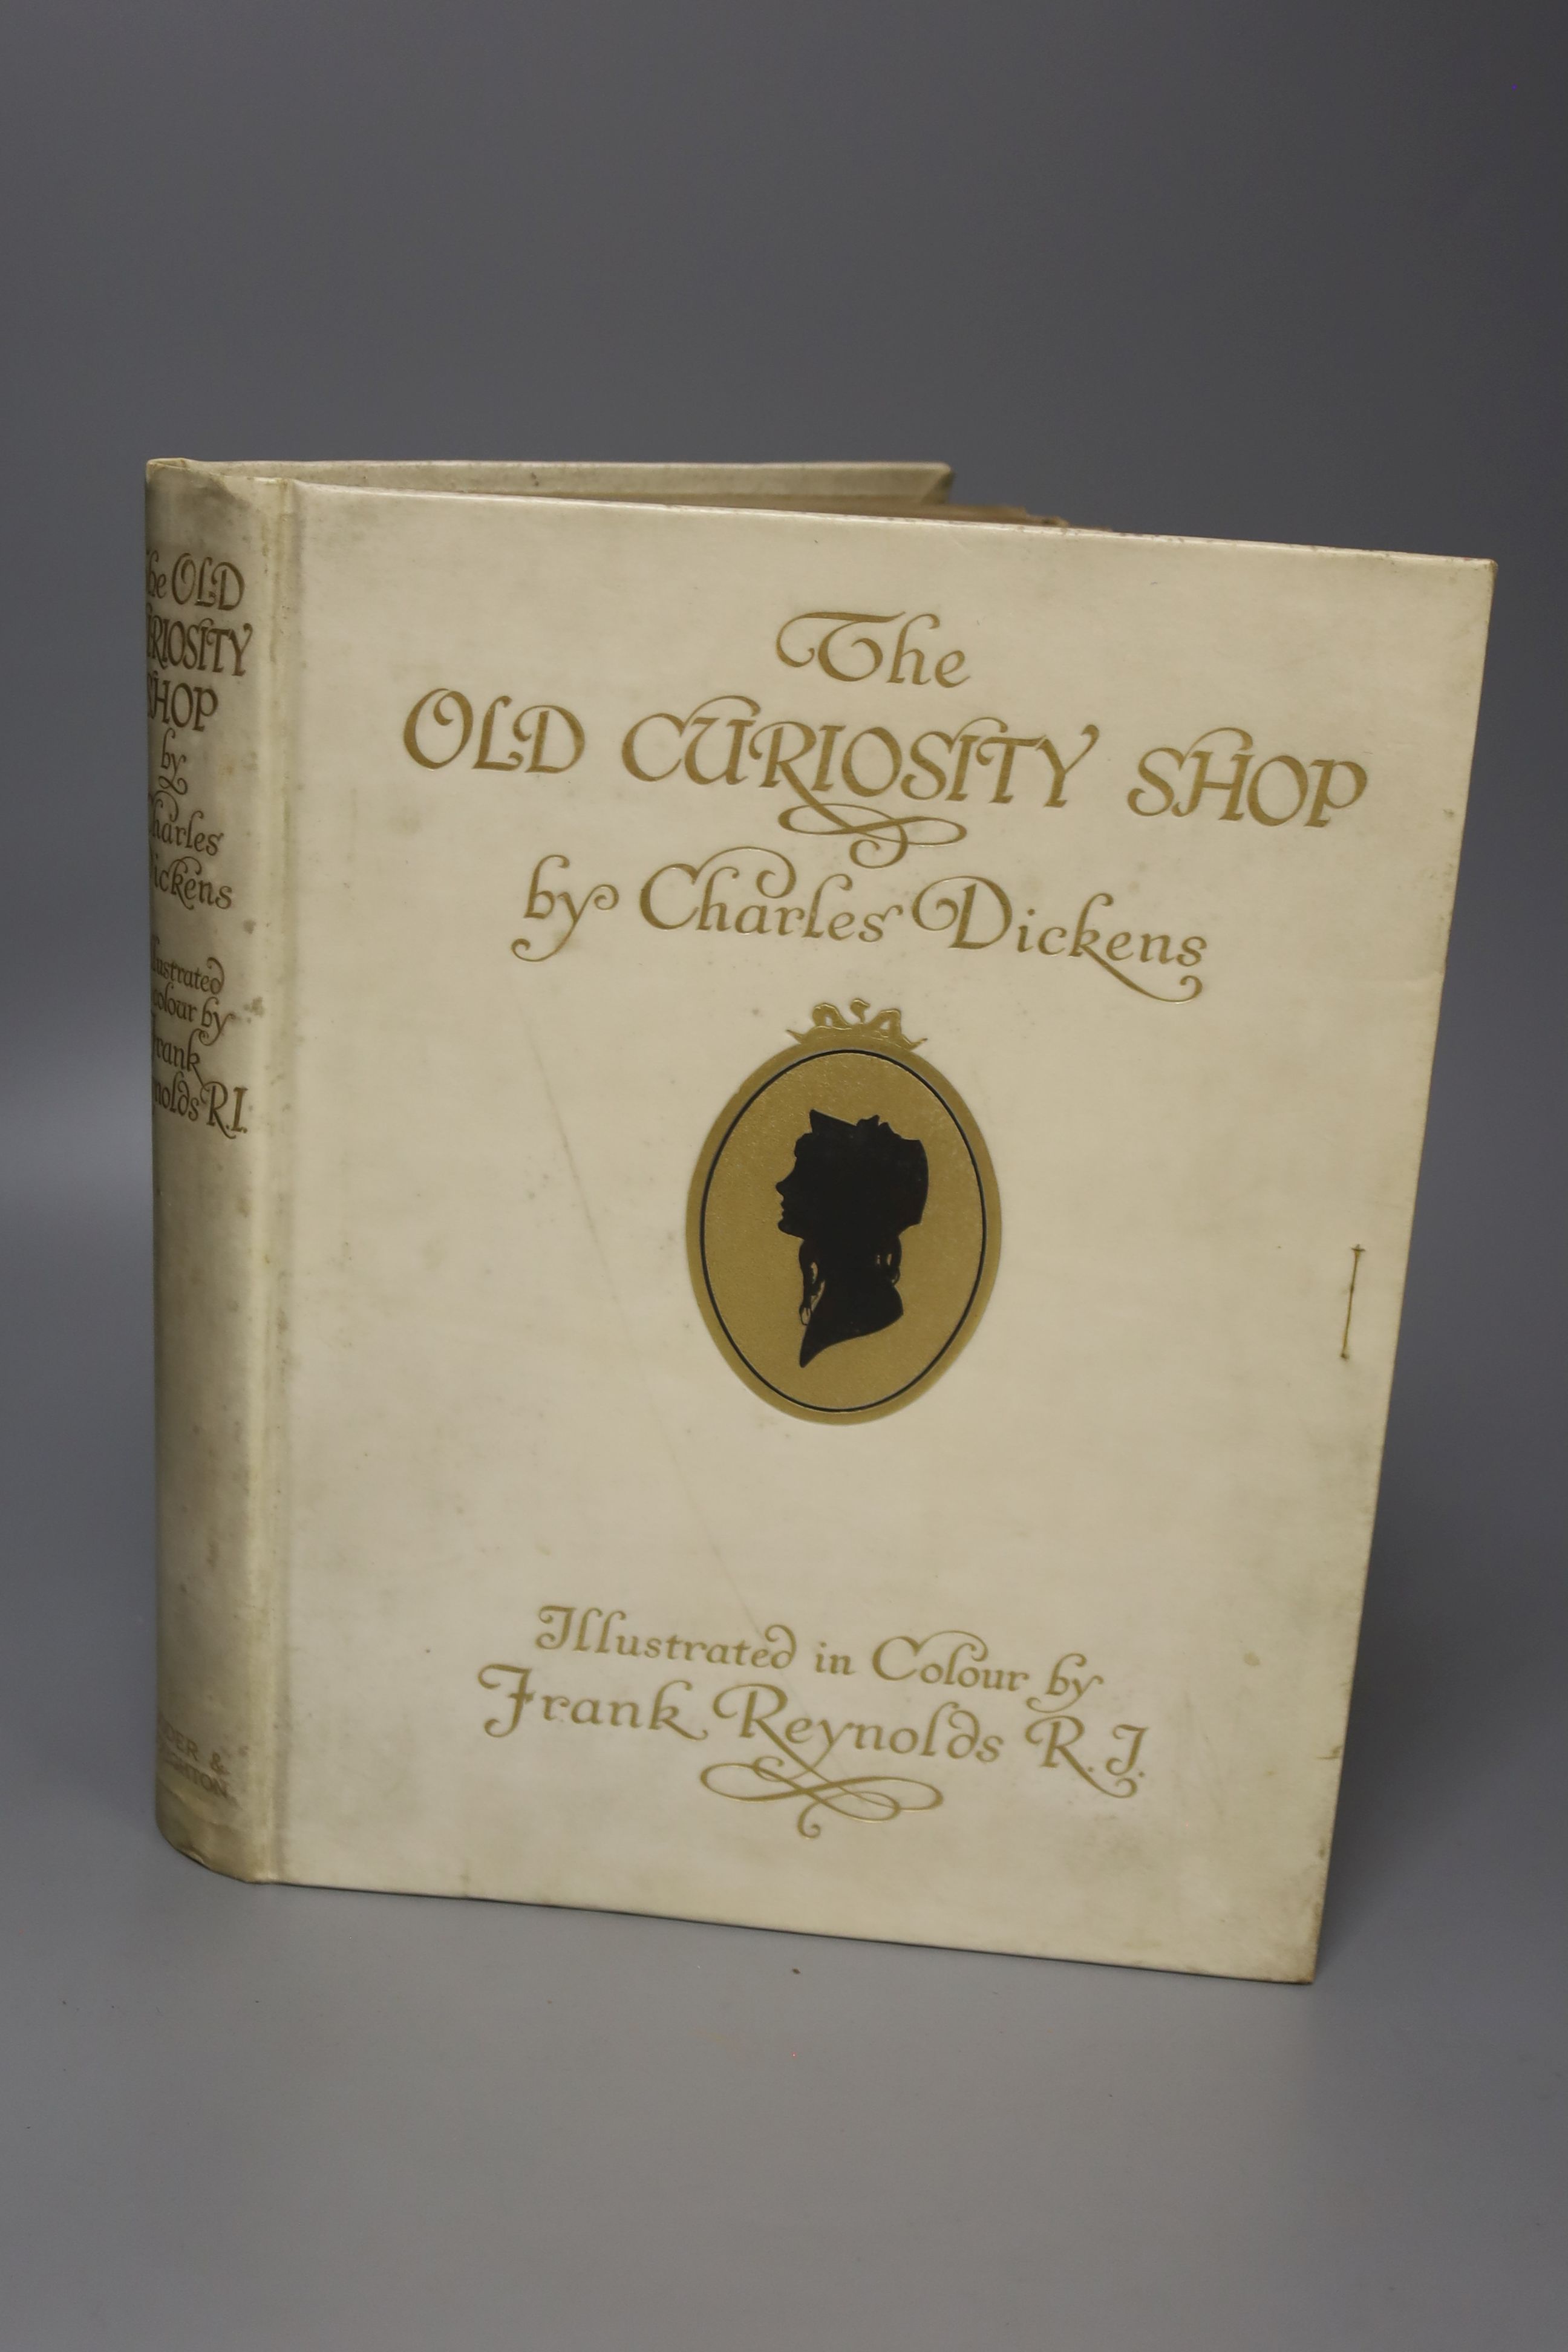 Dickens, Charles - The Old Curiosity Shop, signed and illustrated by Frank Reynolds, quarto, vellum gilt, one of 350, with frontispiece